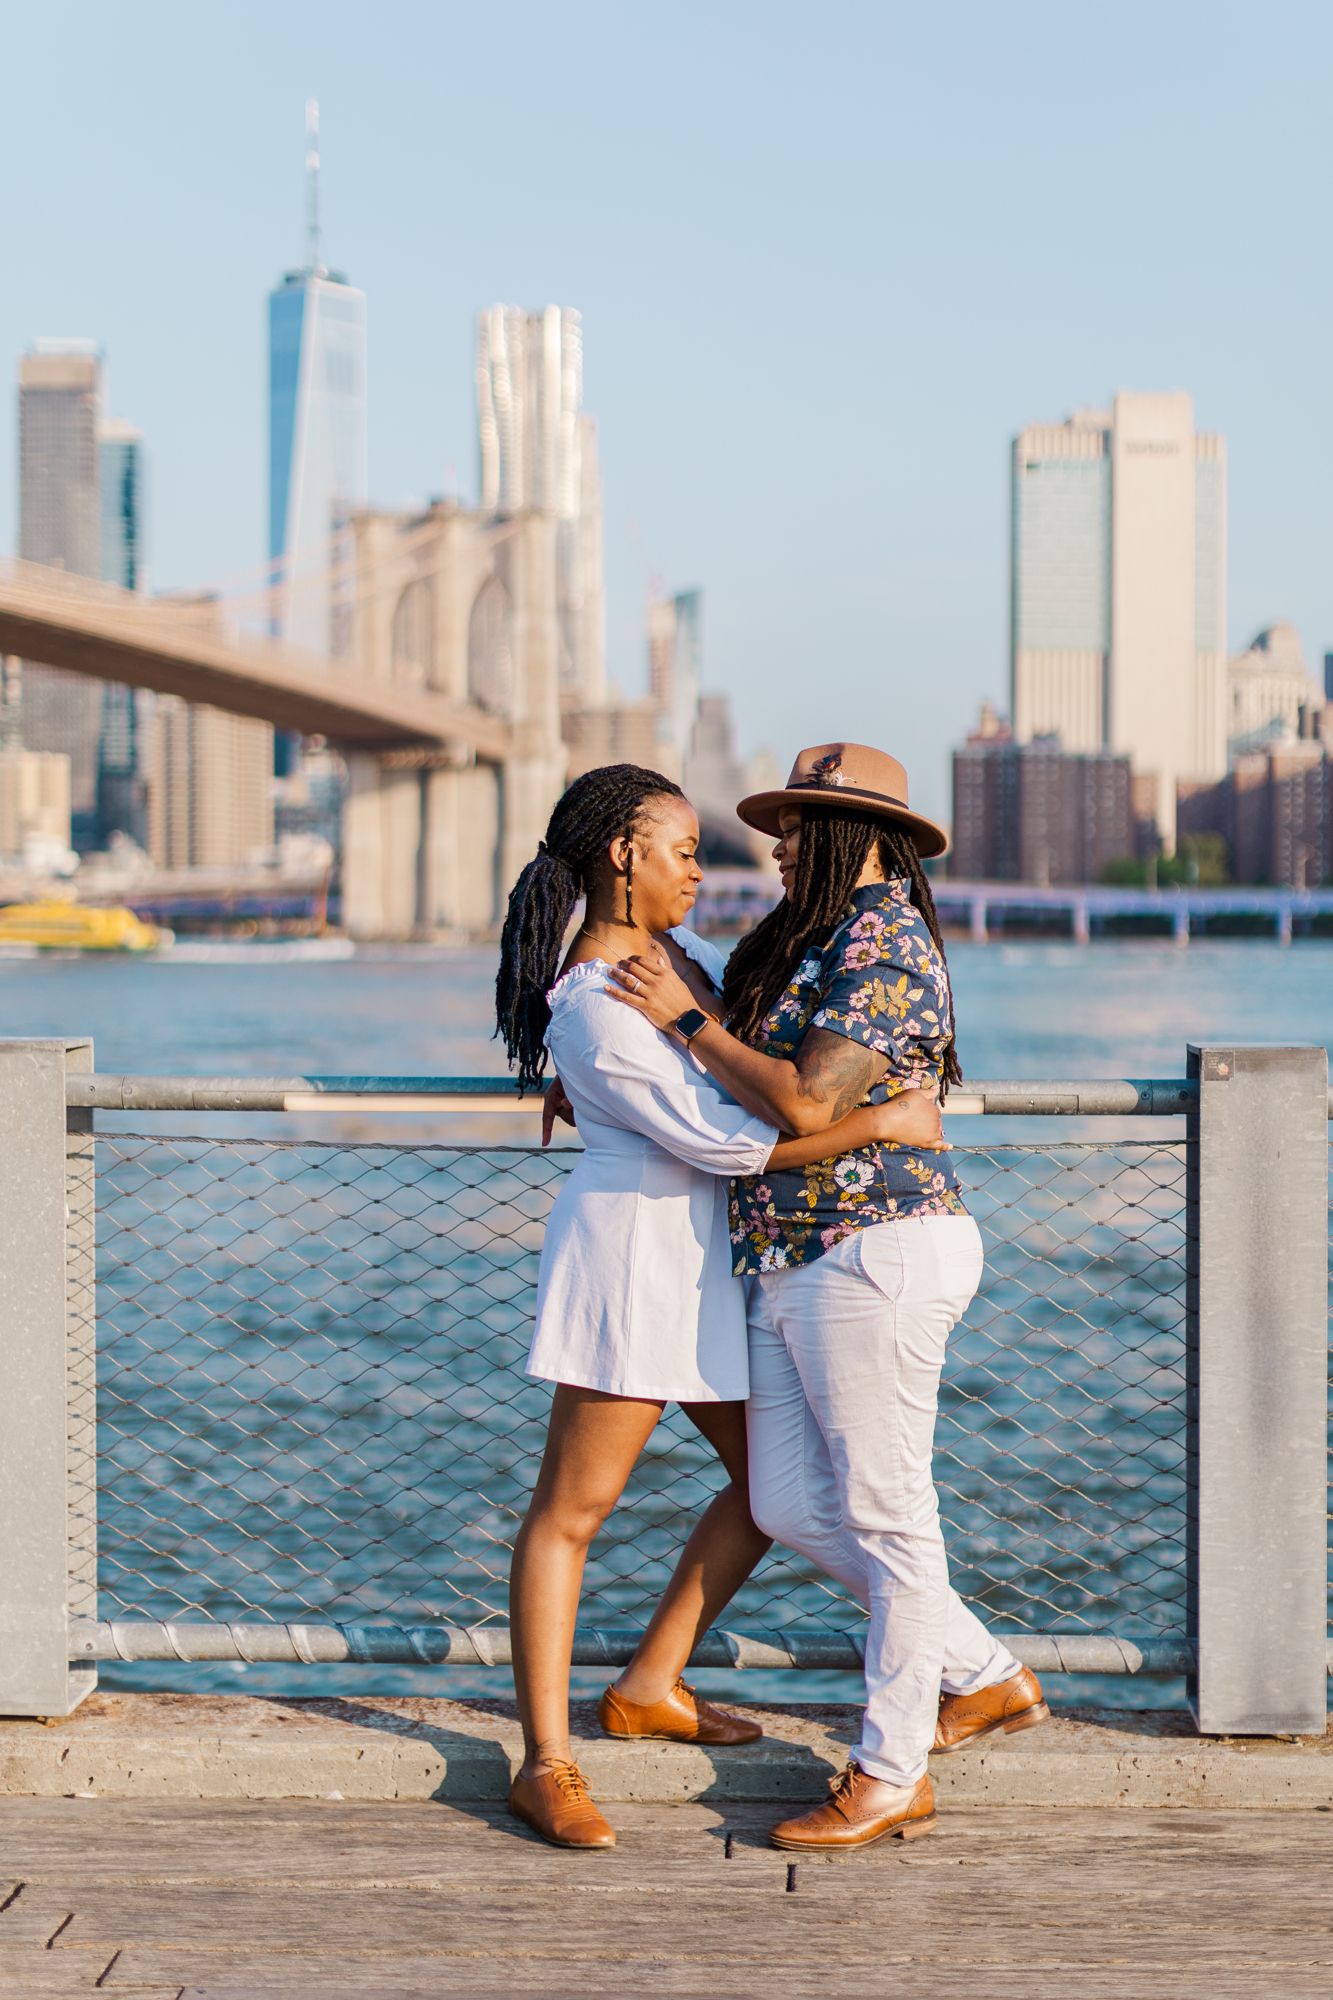 Picturesque Summer Engagement Photography in DUMBO